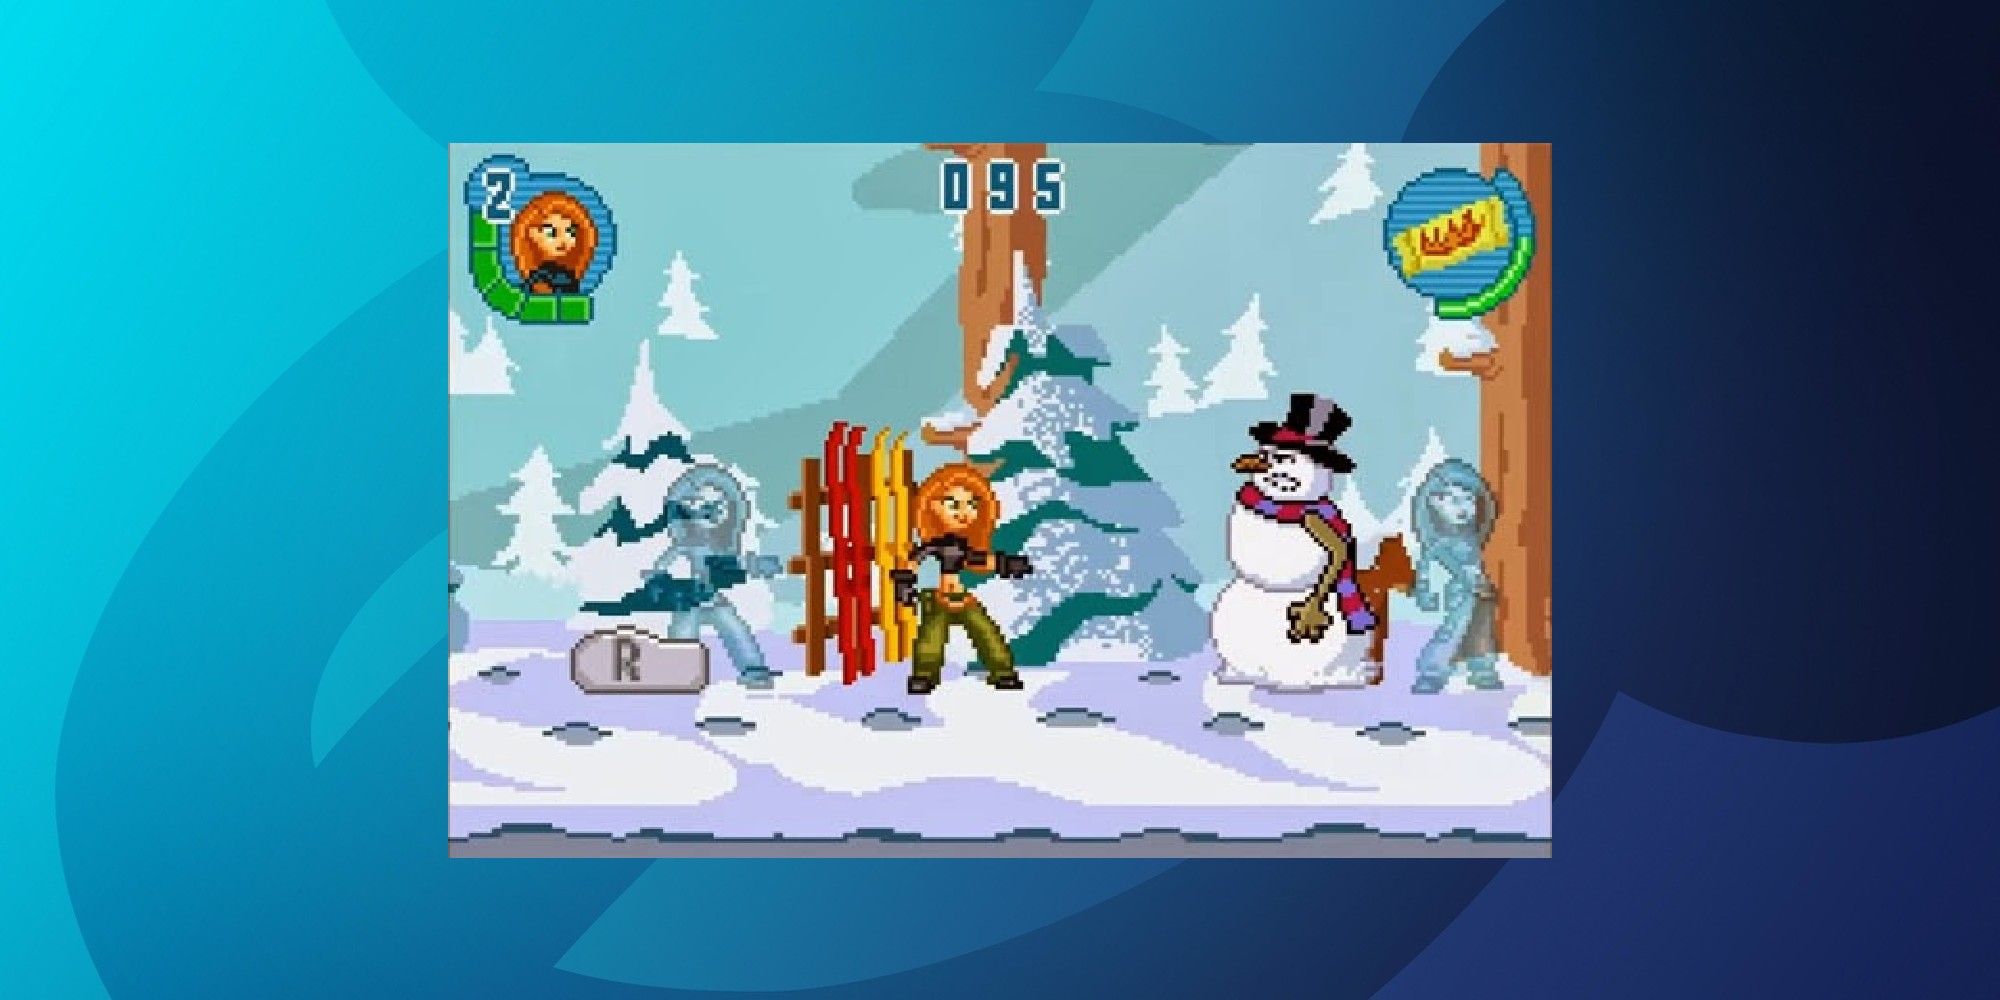 Kim Possible is standing in a snowy landscape facing an evil-looking snowman